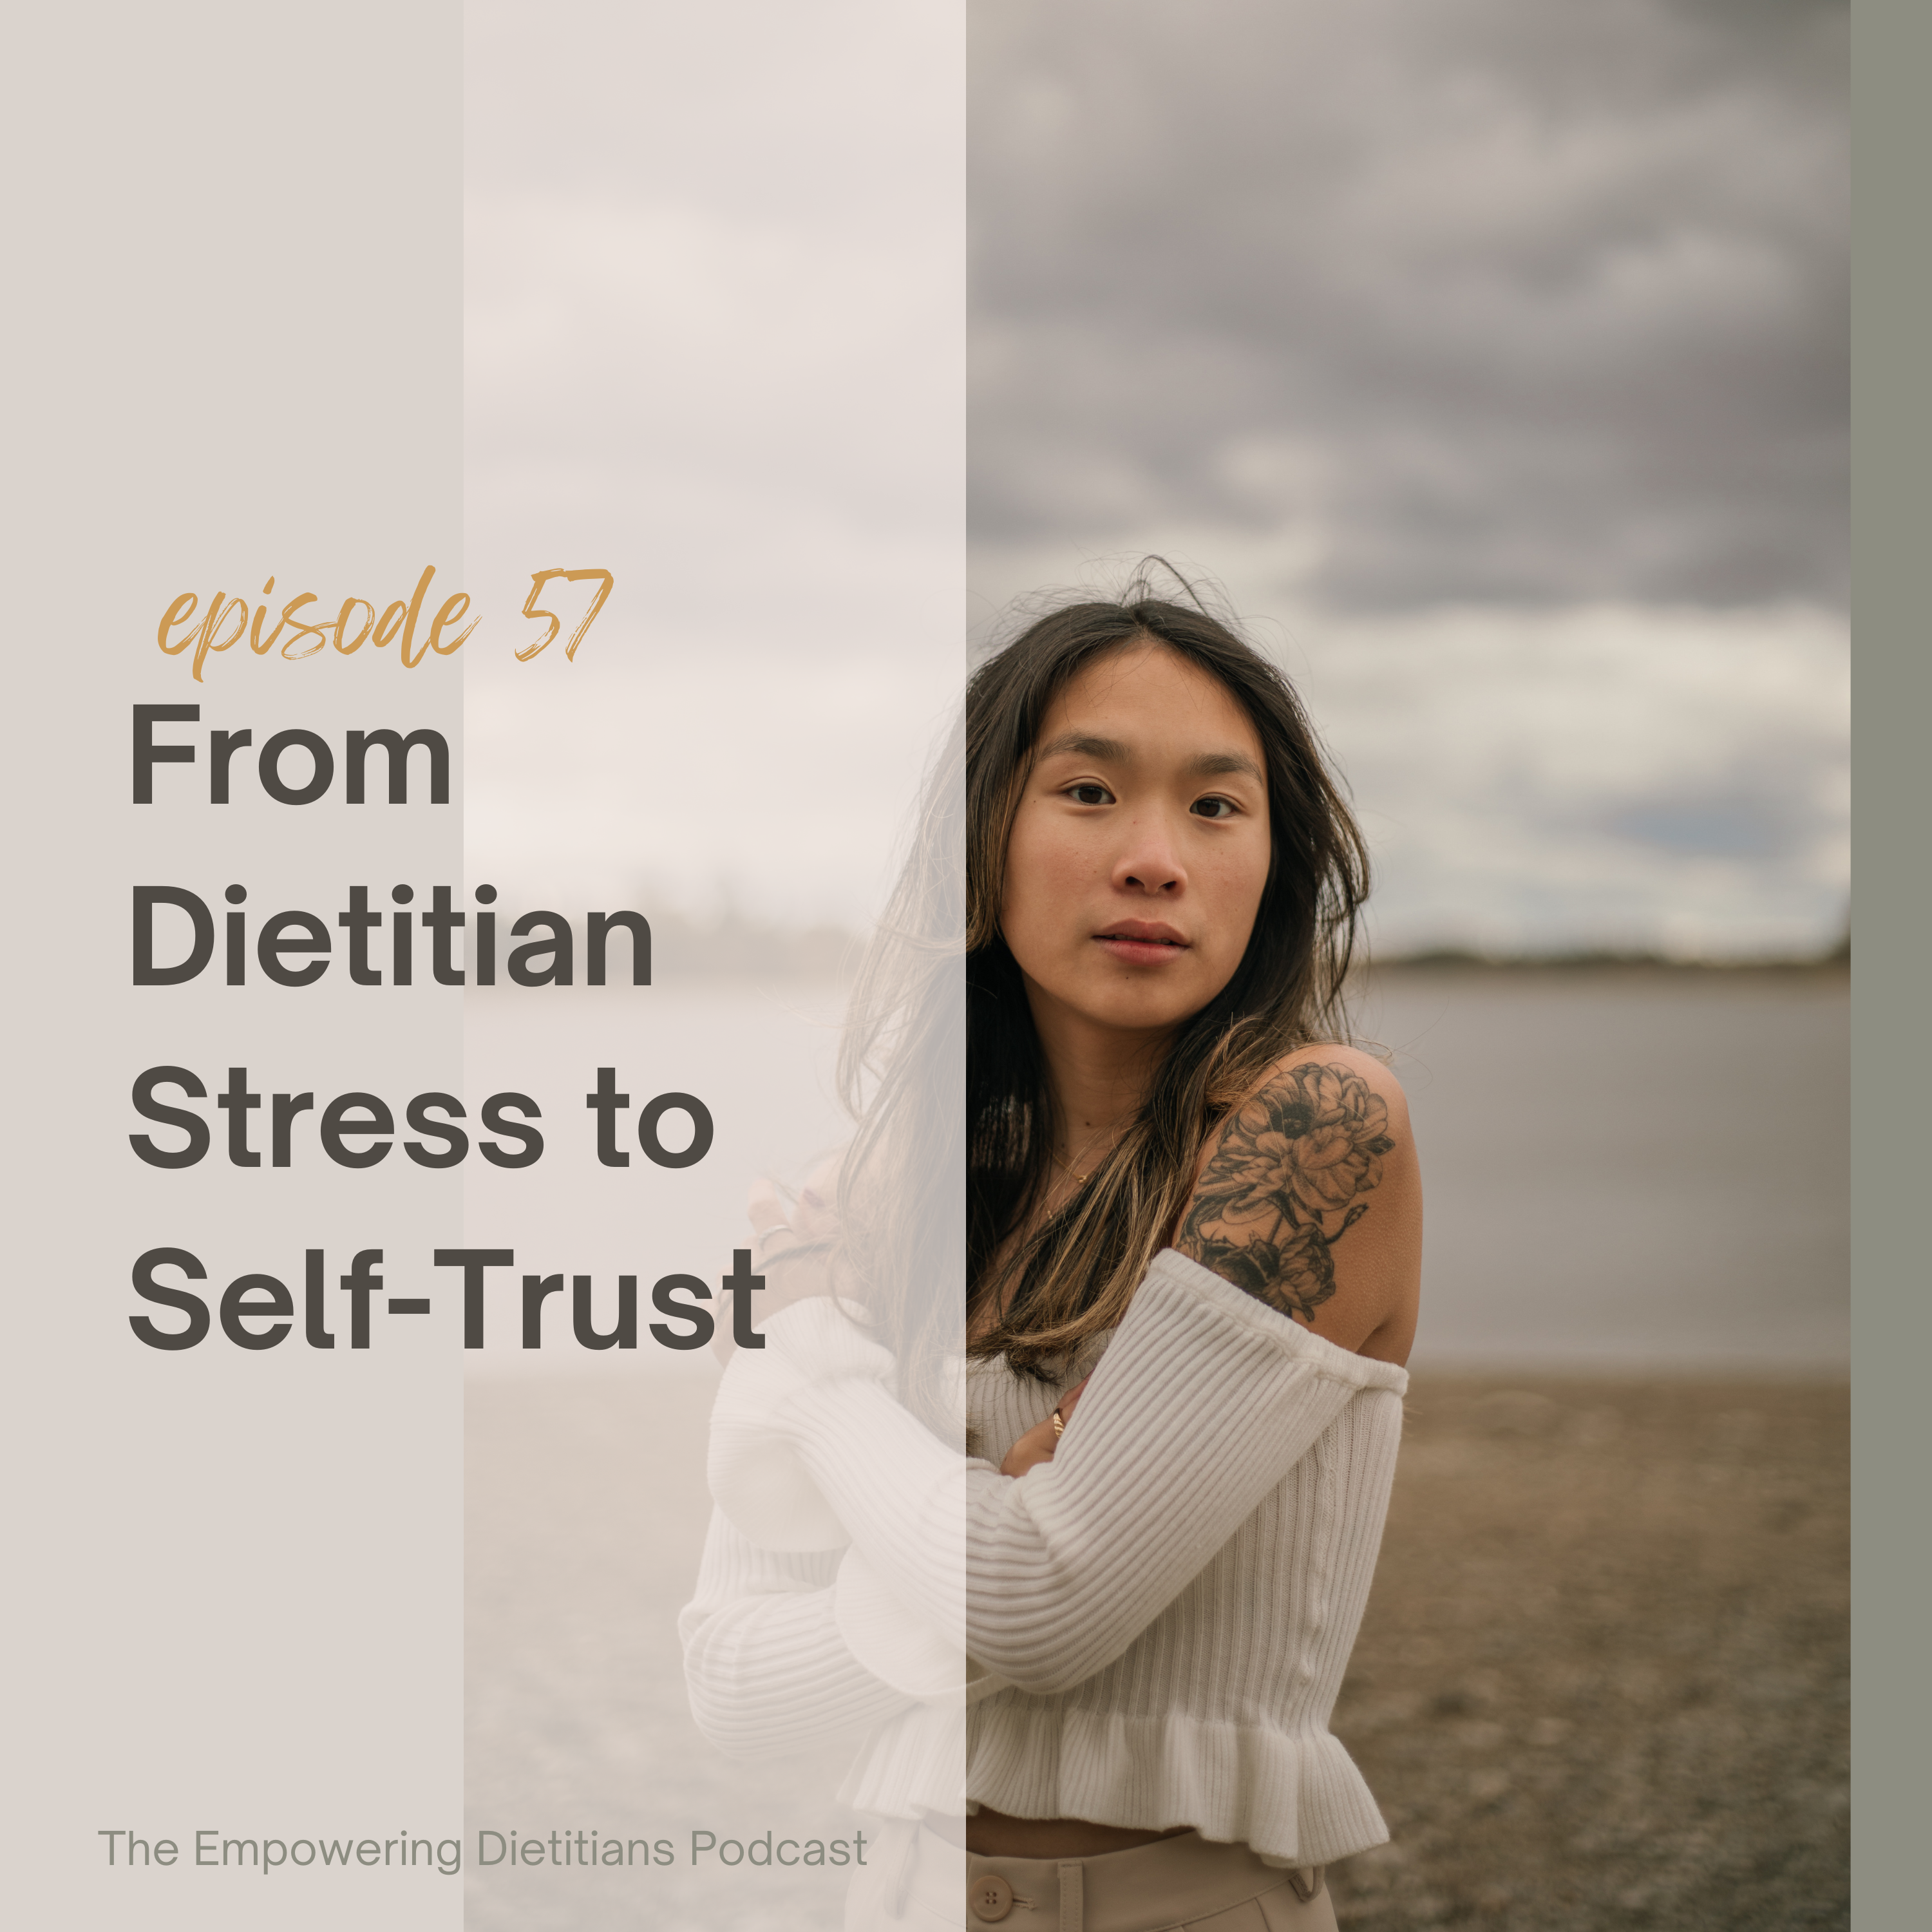 moving from dietitian stress to self-trust